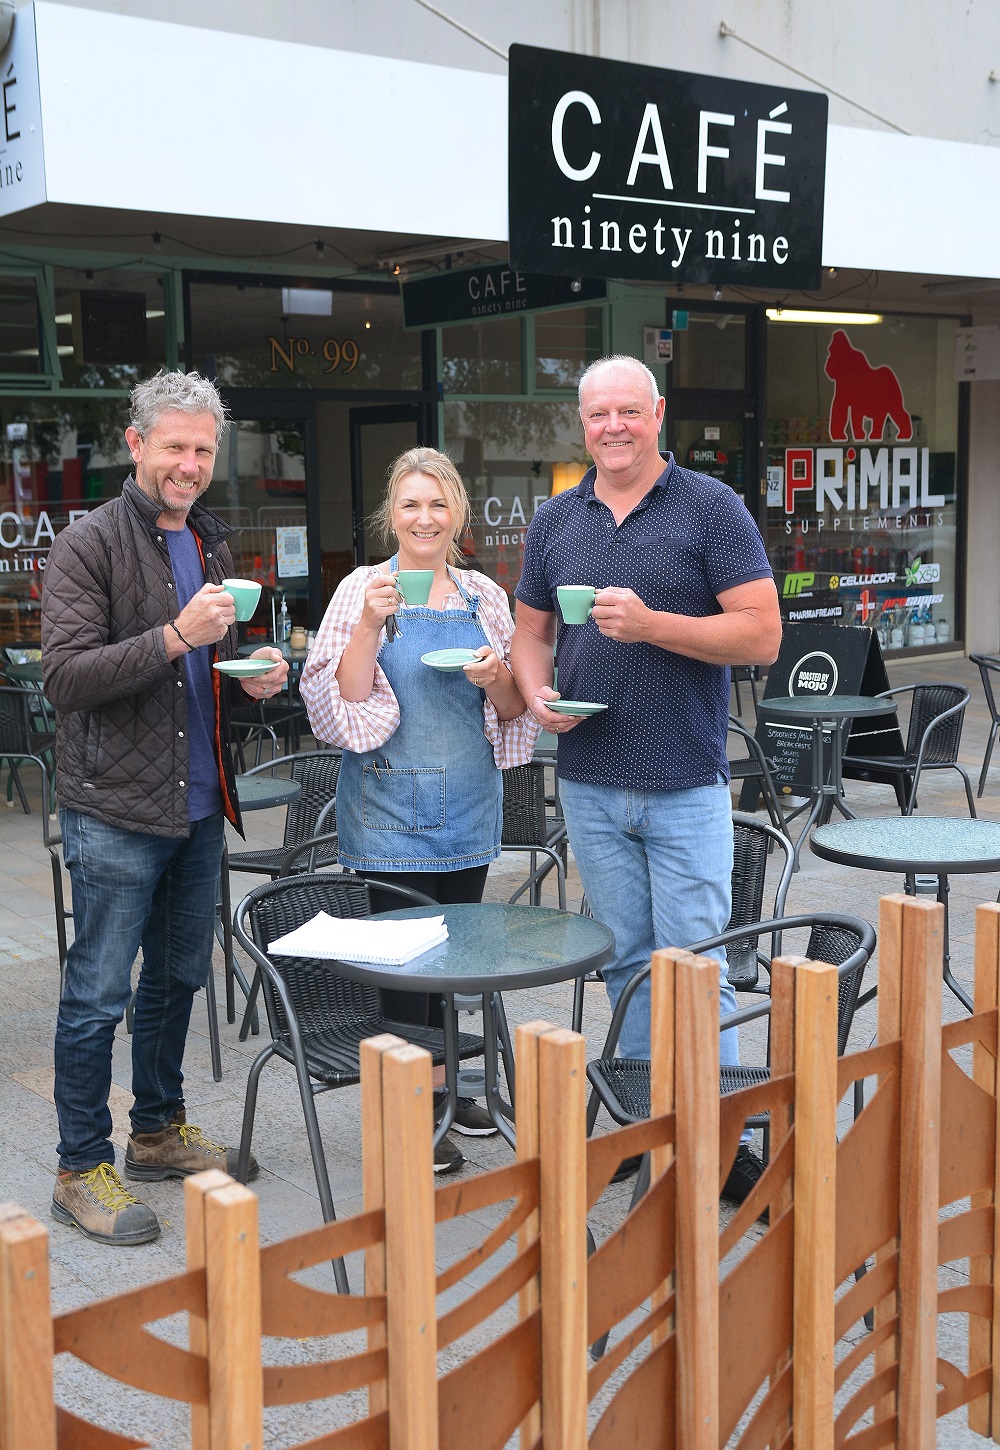 From left: Landscape Architect Fraser Scott with Café Ninety Nine owners Kay McGeough and Darren Edge.